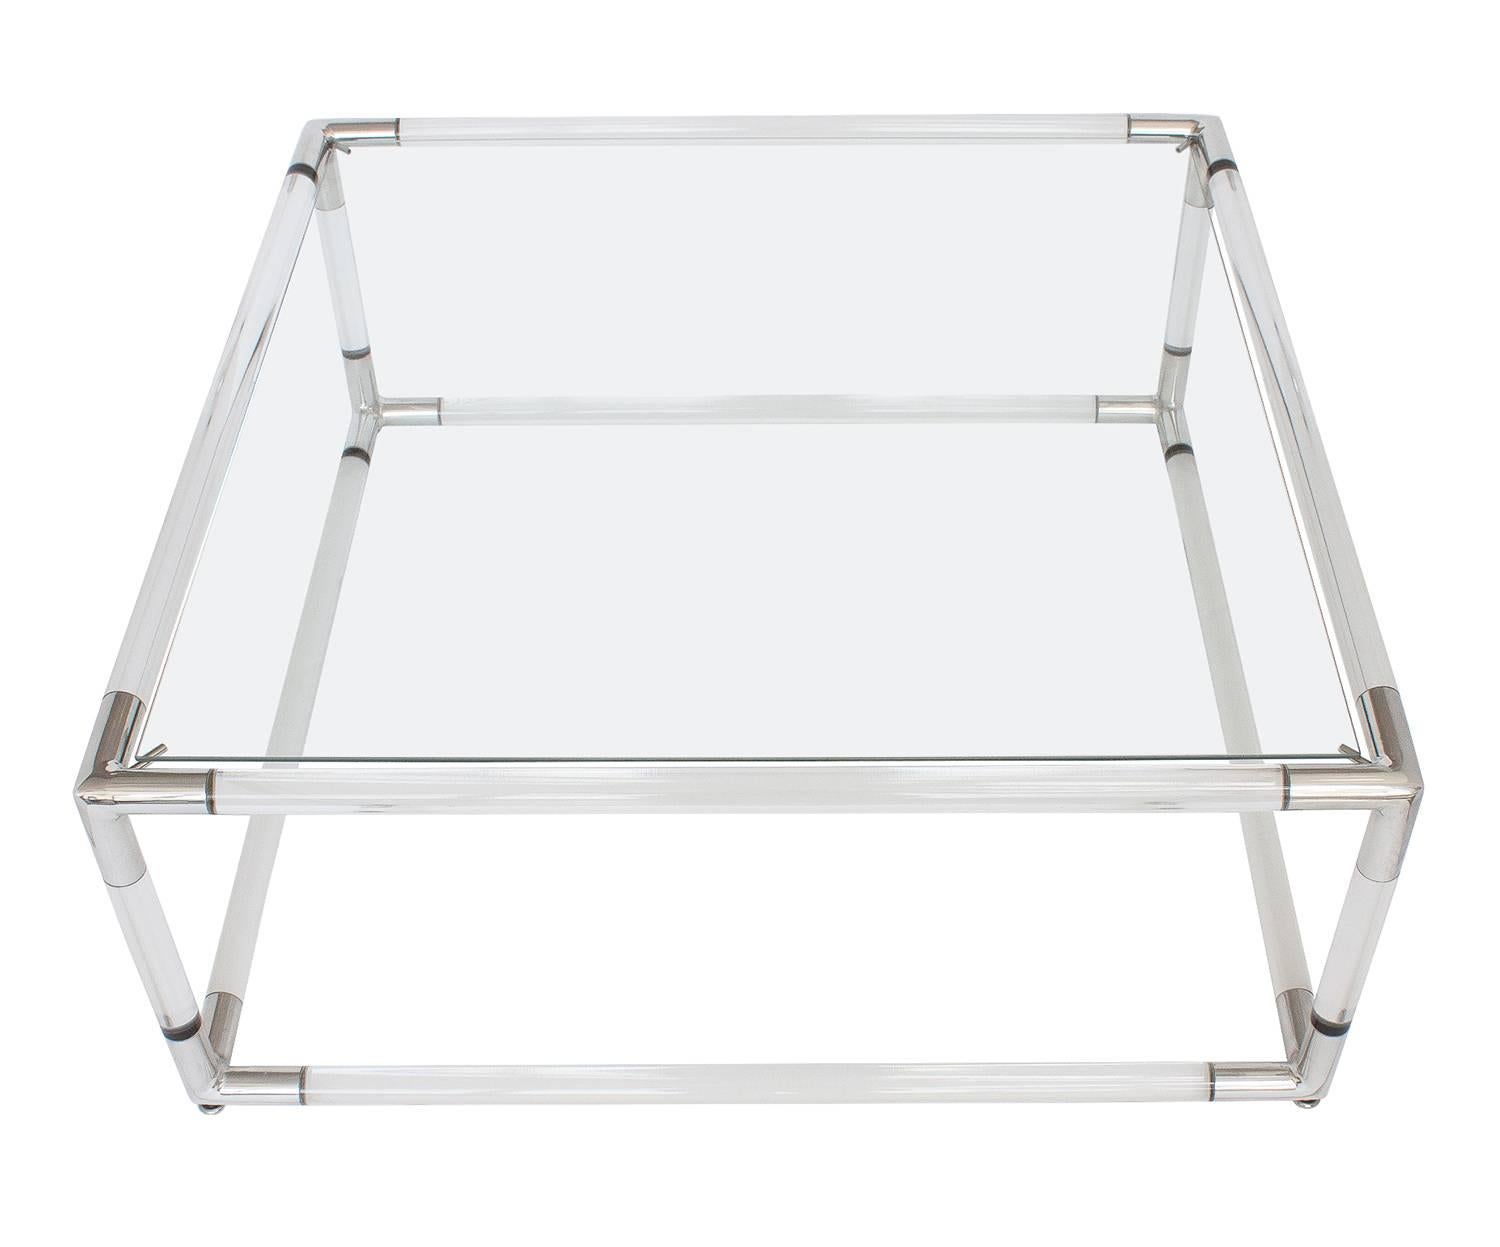 Lucite coffee table with polished aluminium corners and recessed glass top. Measures: The Lucite bars are 1.25